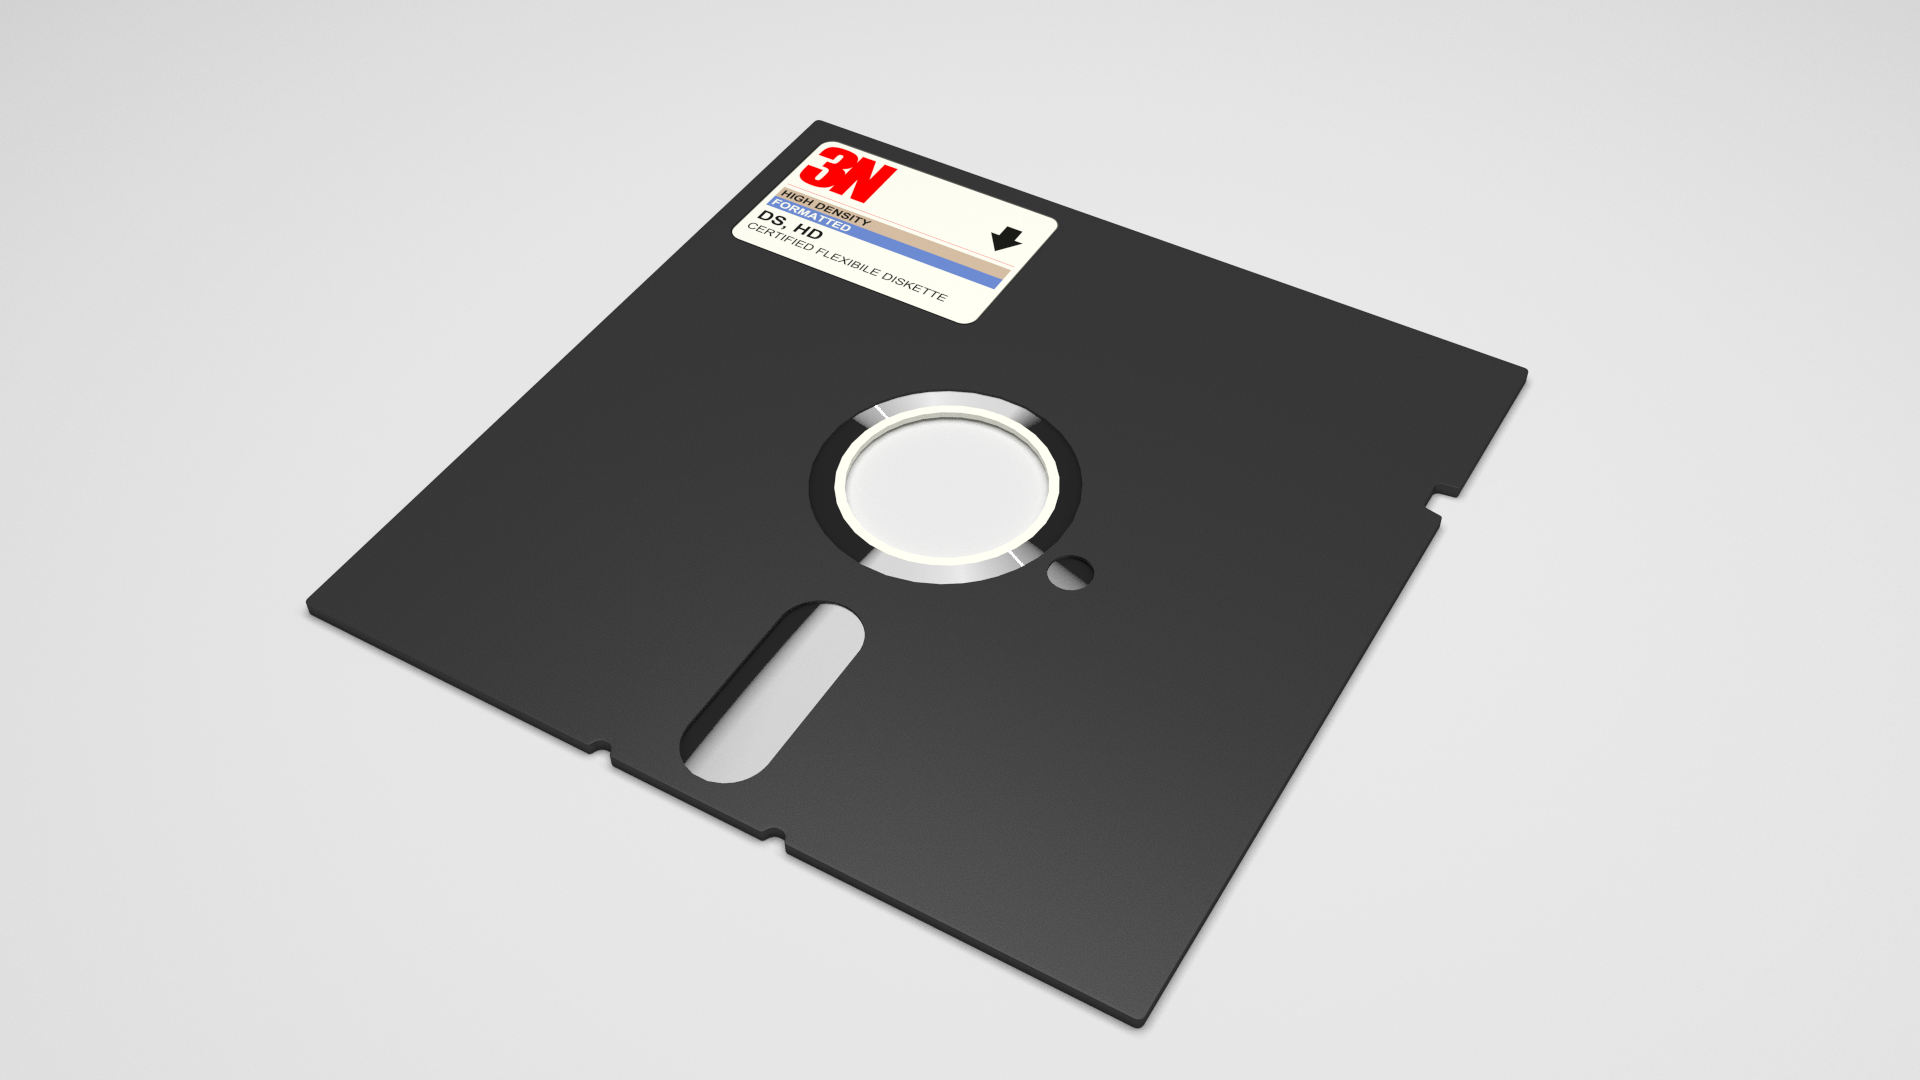 New Floppy disk model! Ironically enough, you couldn't fit this PNG image on less than three of them.: techcompliant